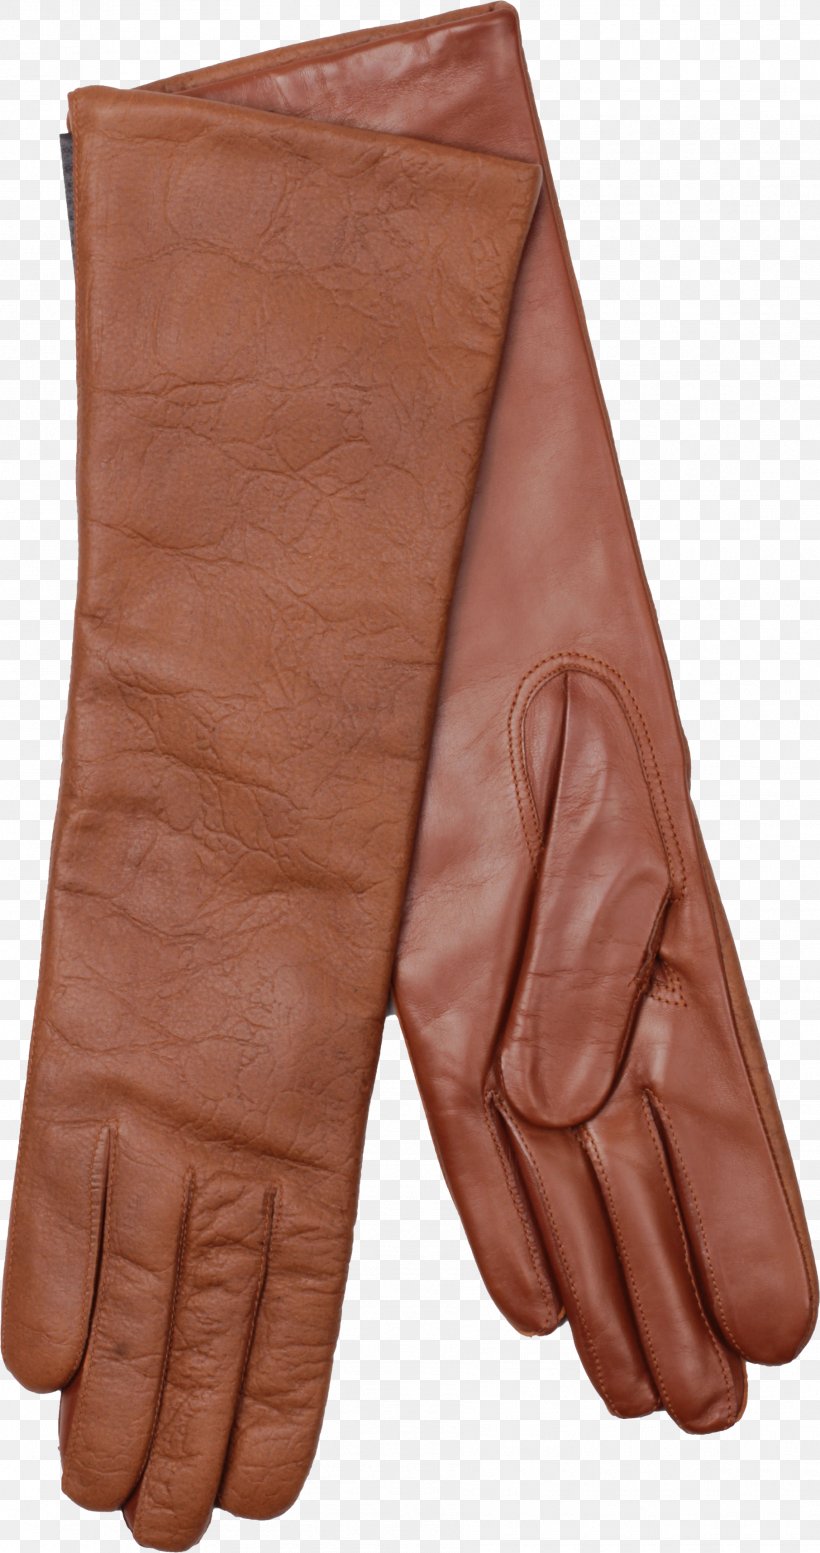 Glove Clothing Leather Clip Art, PNG, 1812x3432px, Glove, Bag, Boxing Glove, Clothing, Hand Download Free